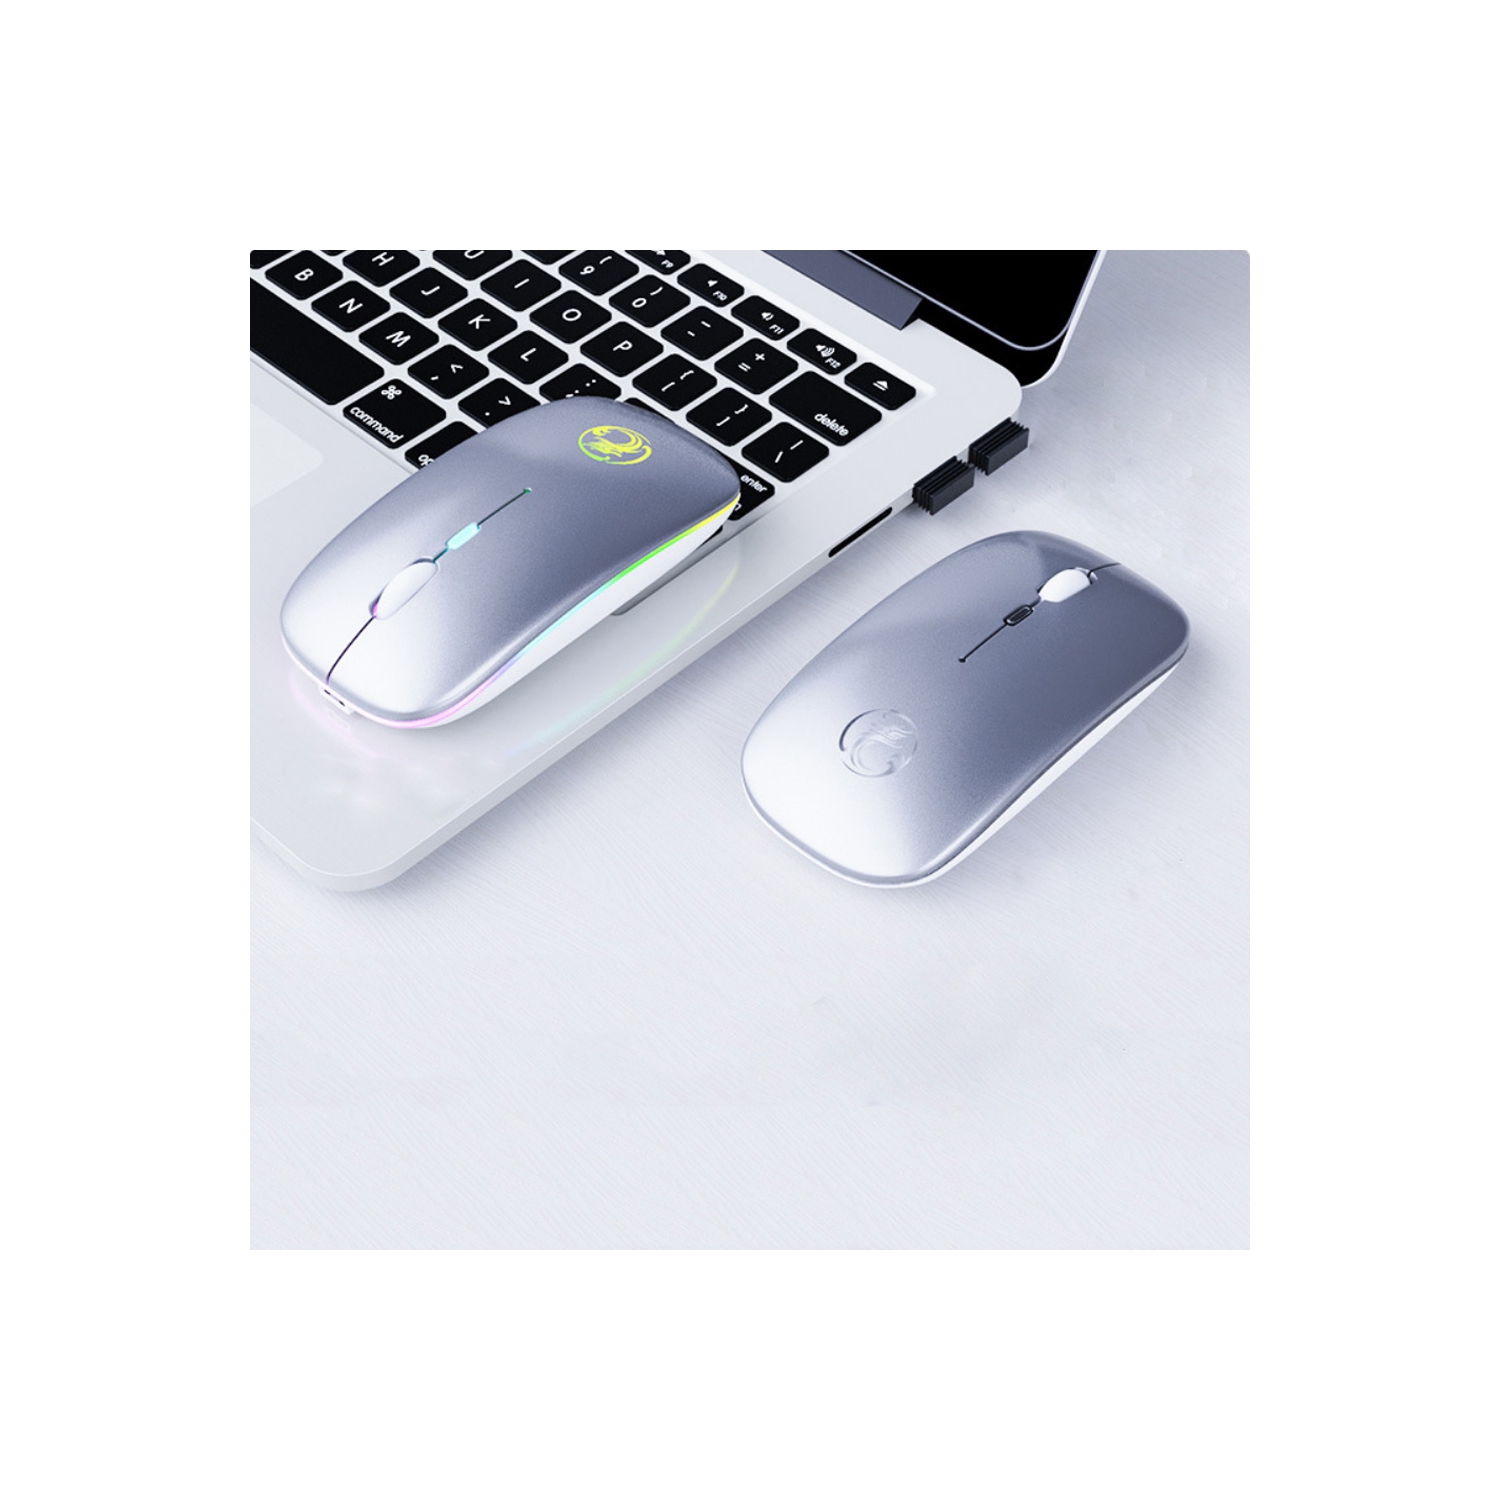 axGear Mouse Wireless Computer Bluetooth 5.0 USB Rechargeable Silent Ergonomic Mice